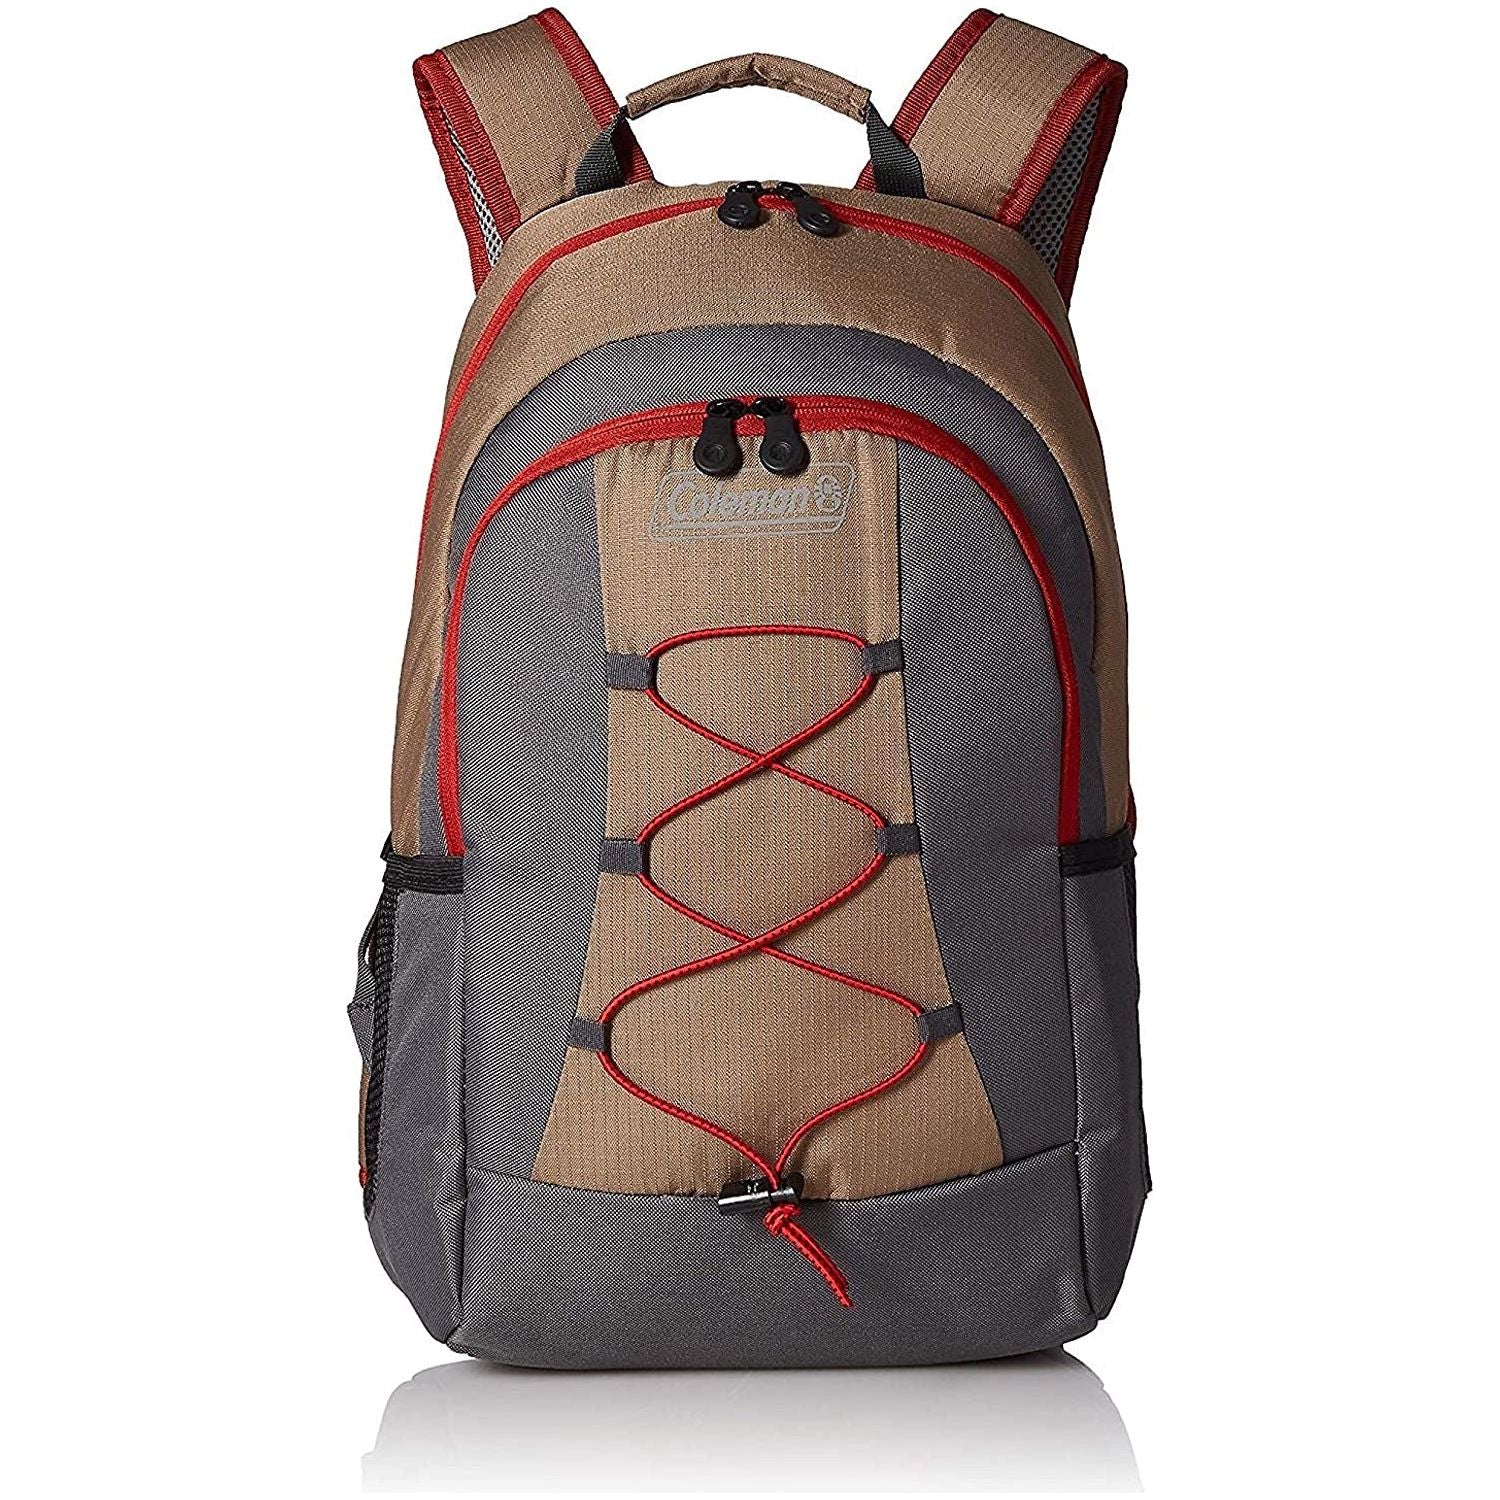 Chiller Series Insulated Wheeled Backpack Soft Cooler